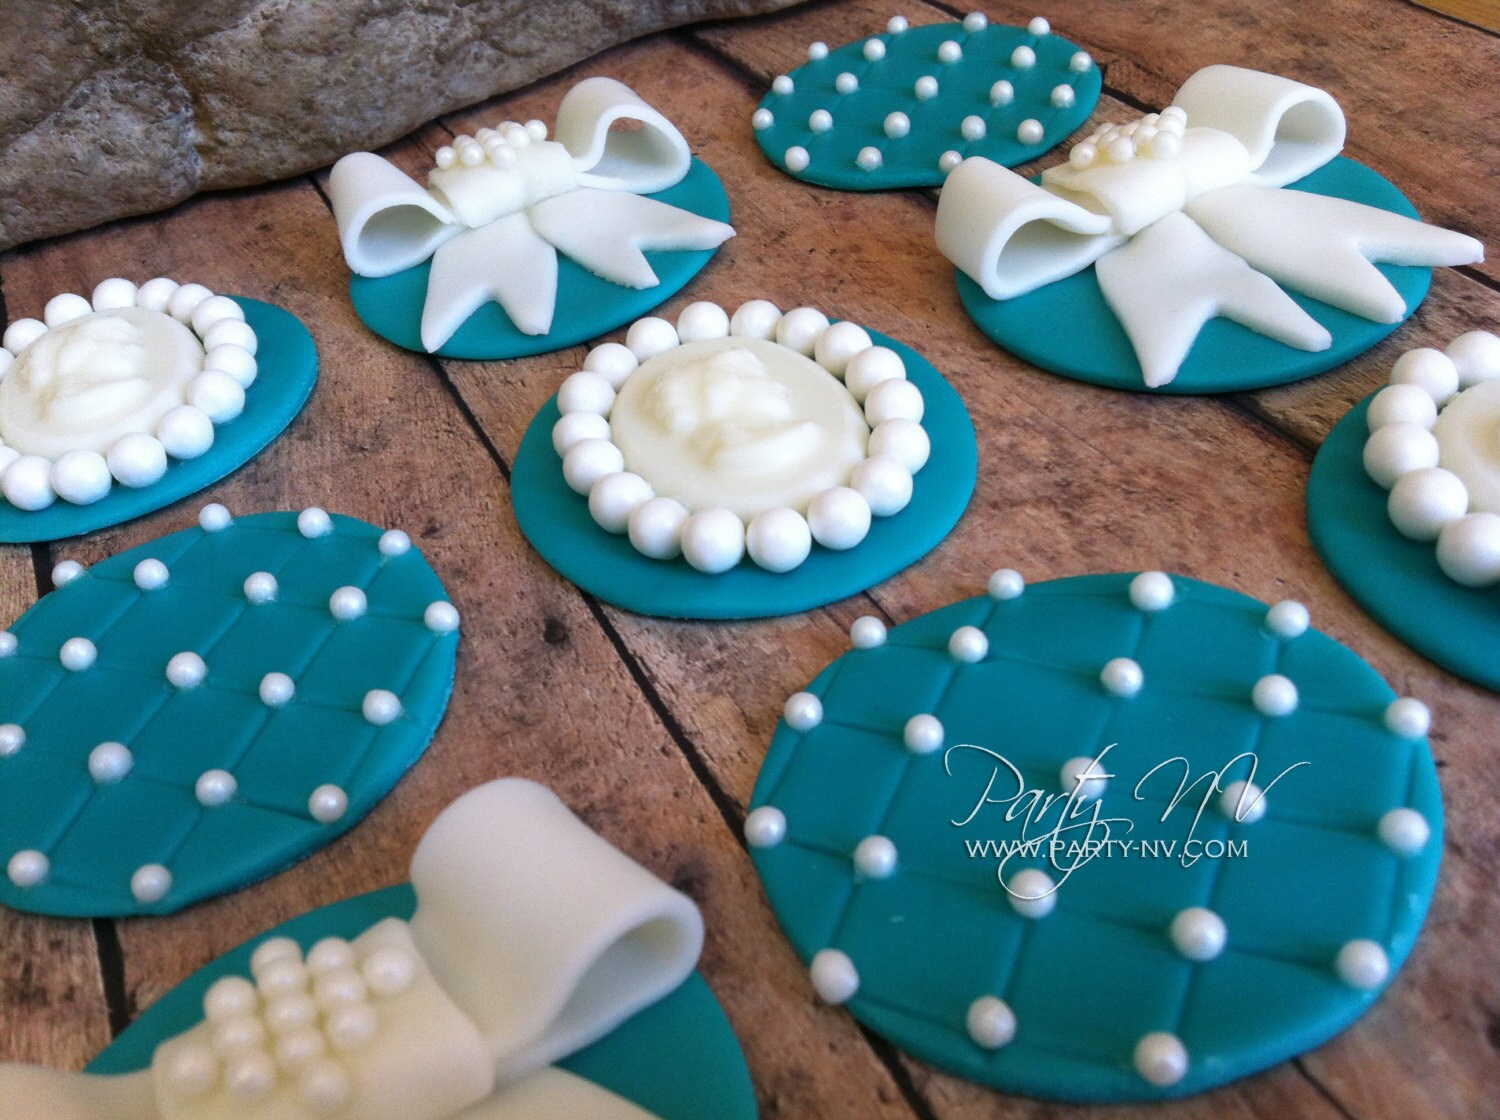 edible-fondant-toppers-victorian-inspired-by-partynv-on-etsy